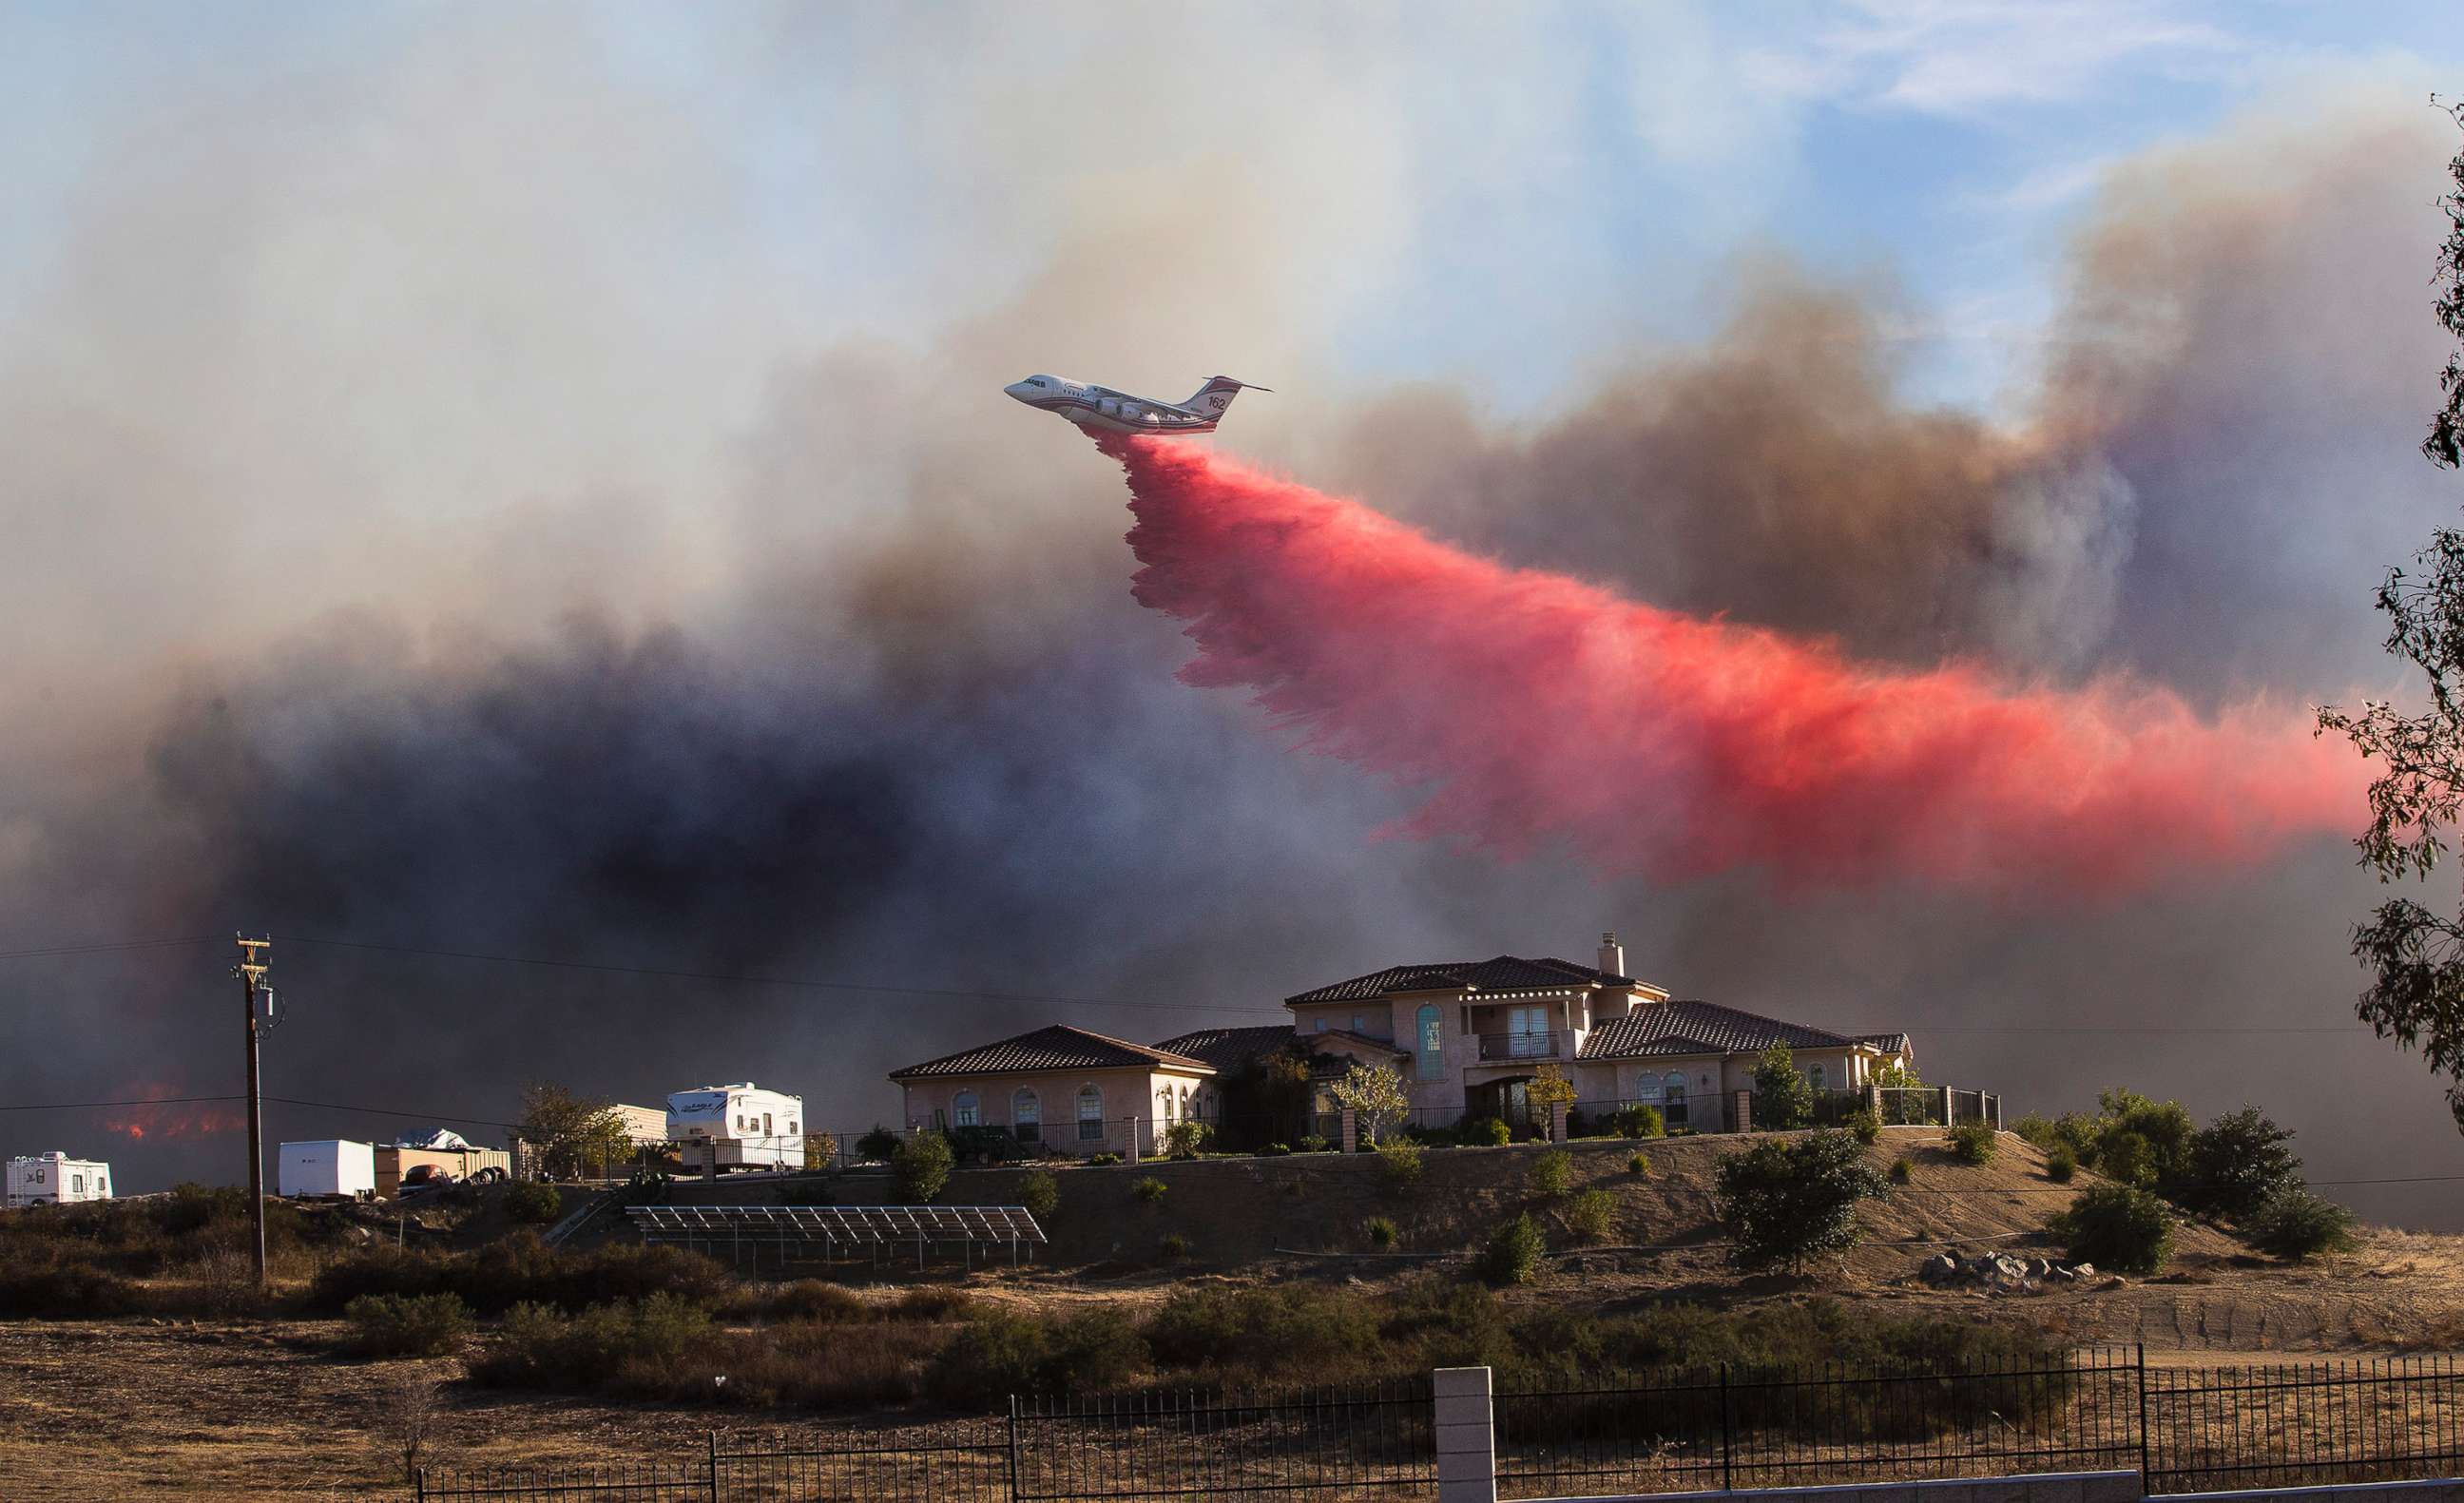 PHOTO: A plane drops fire retardant near a home to stop the wind driven Liberty Fire near Los Alamos Road on Dec. 7, 2017 in Murrieta, Calif.